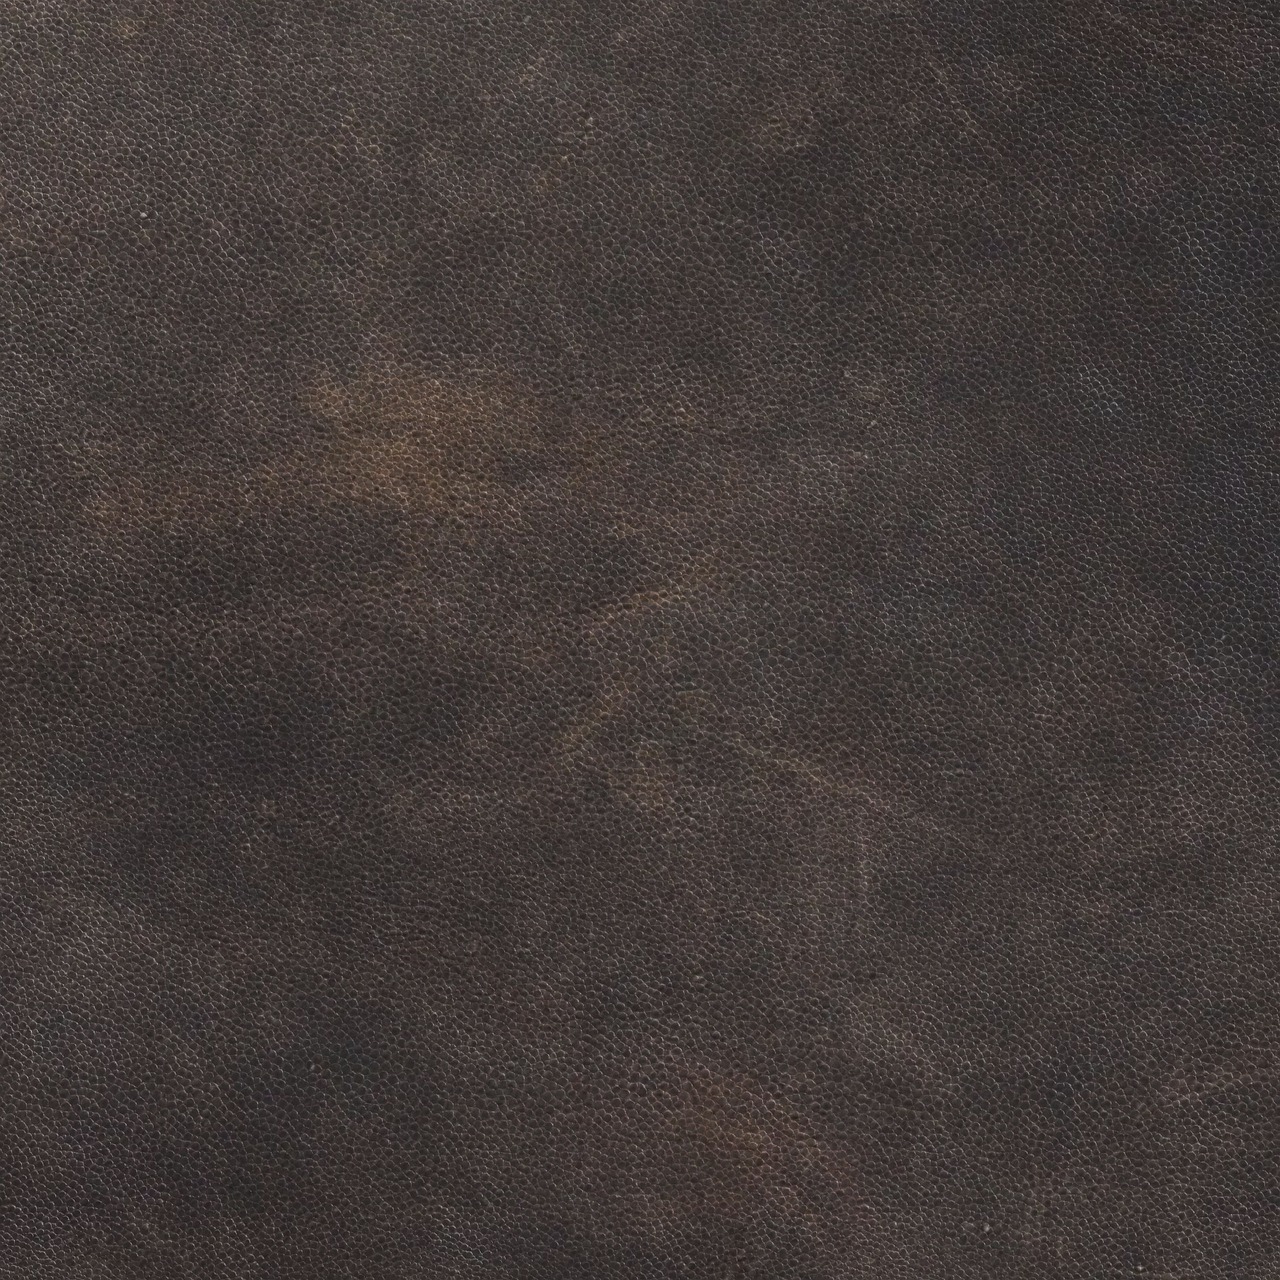 leather texture scrapbooking free photo